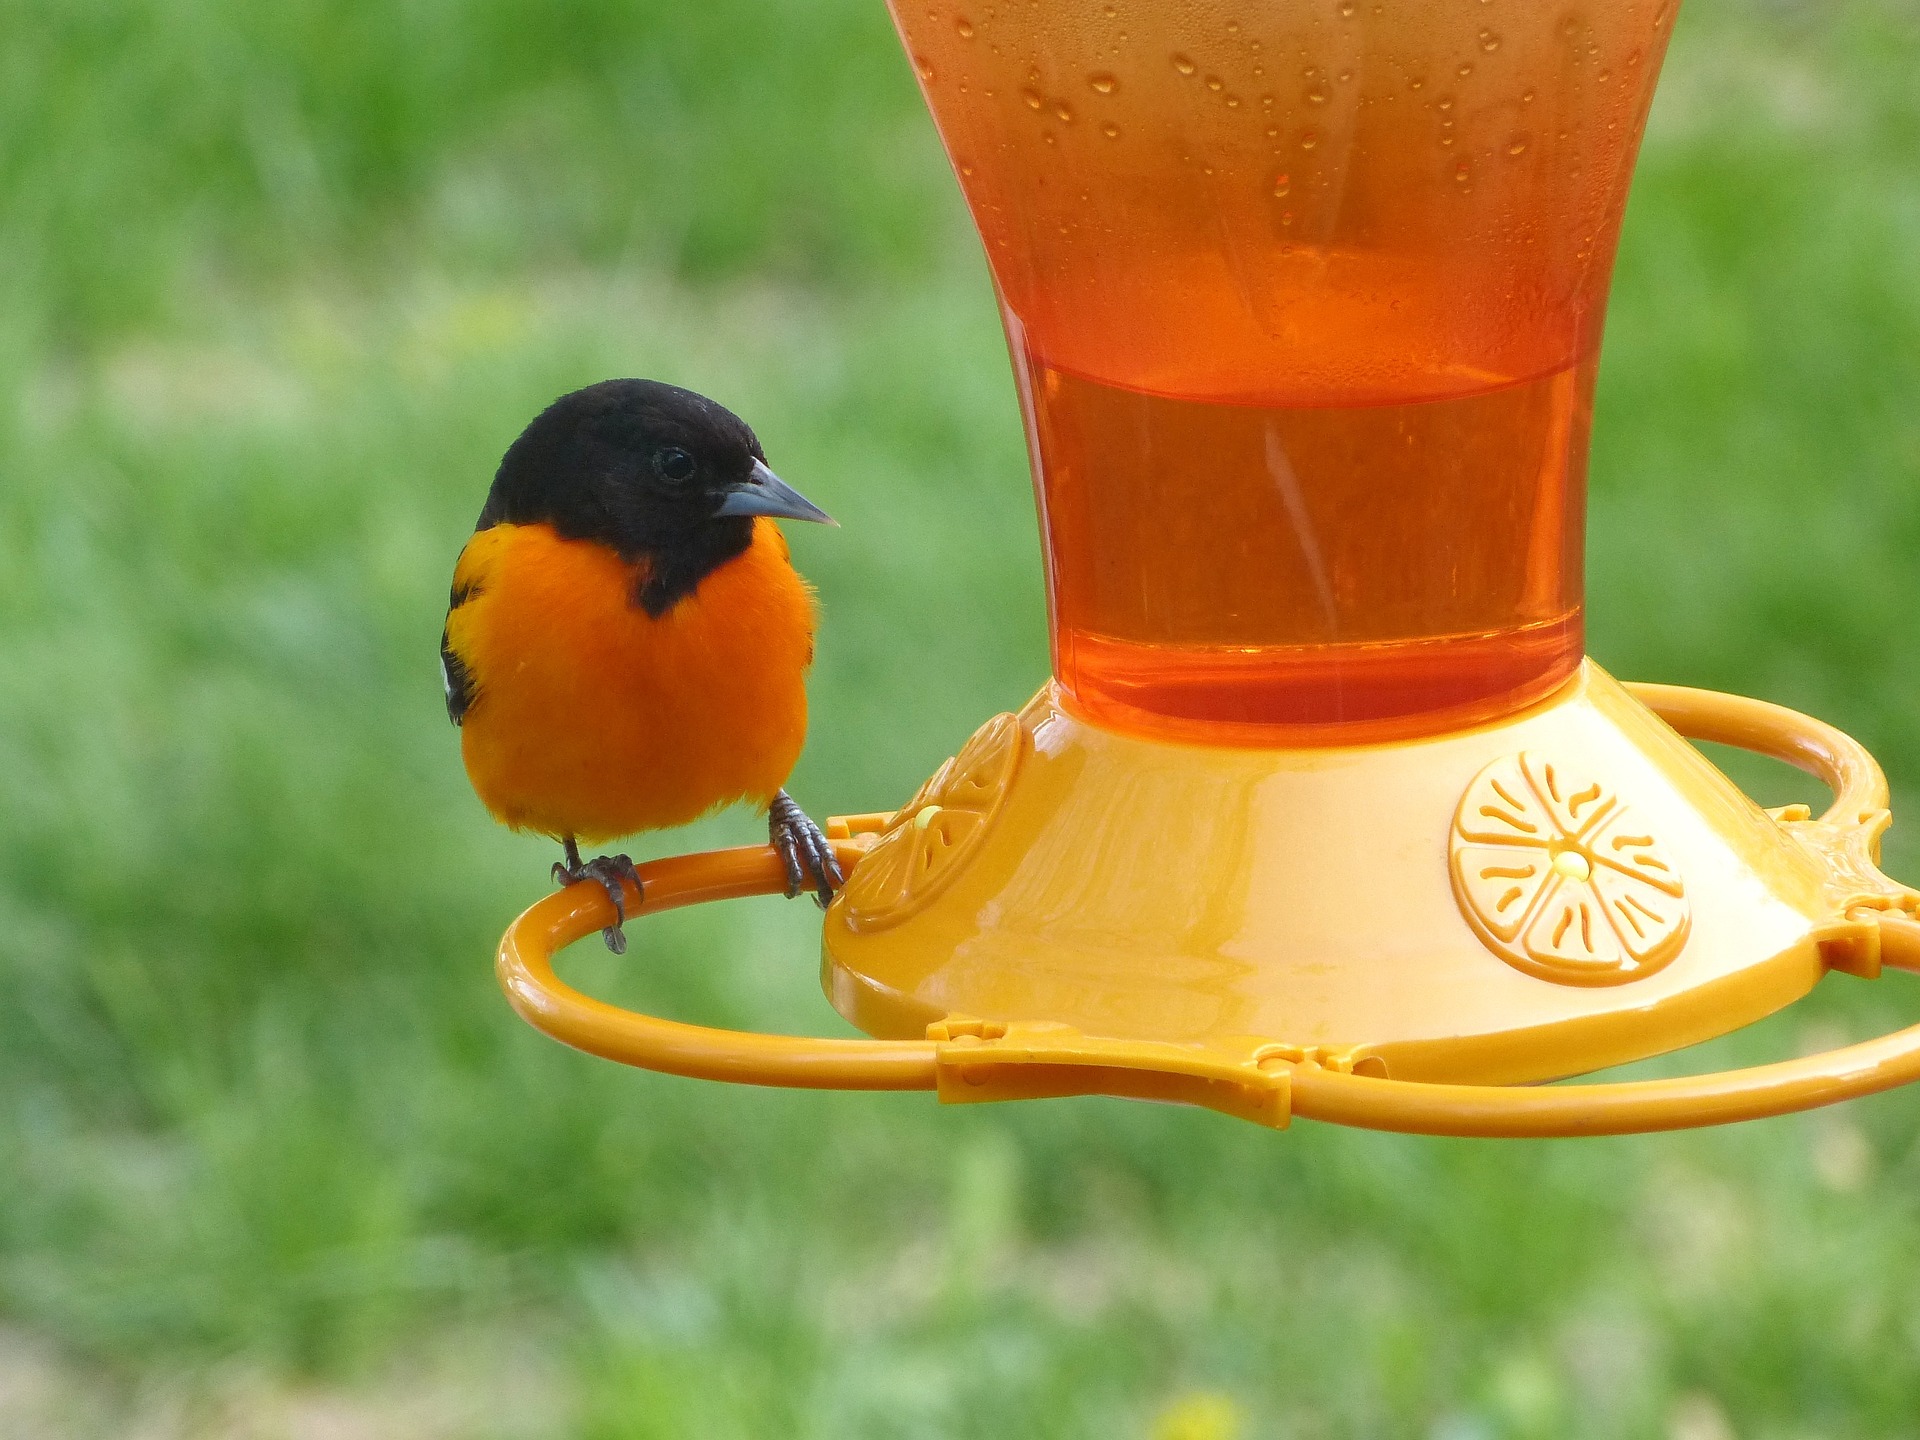 baltmore oriole at nectar feeder - how to attract orioles